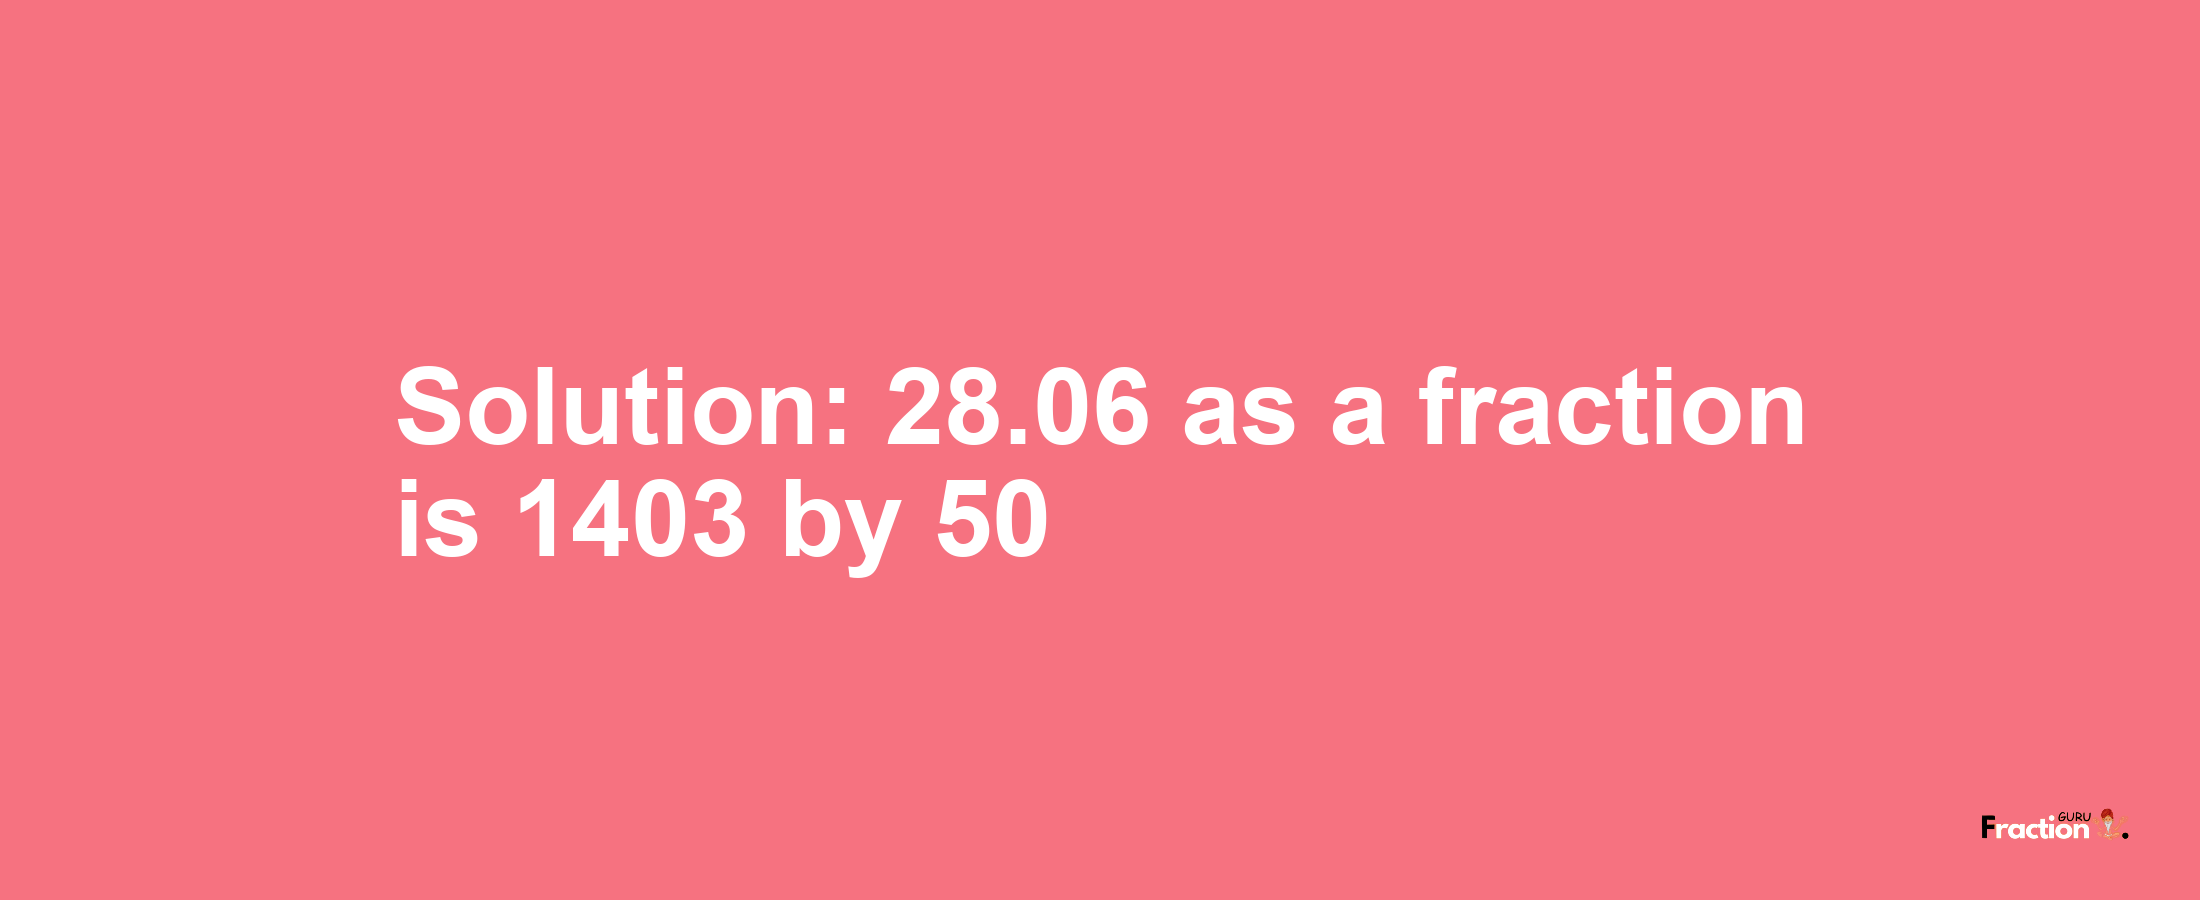 Solution:28.06 as a fraction is 1403/50